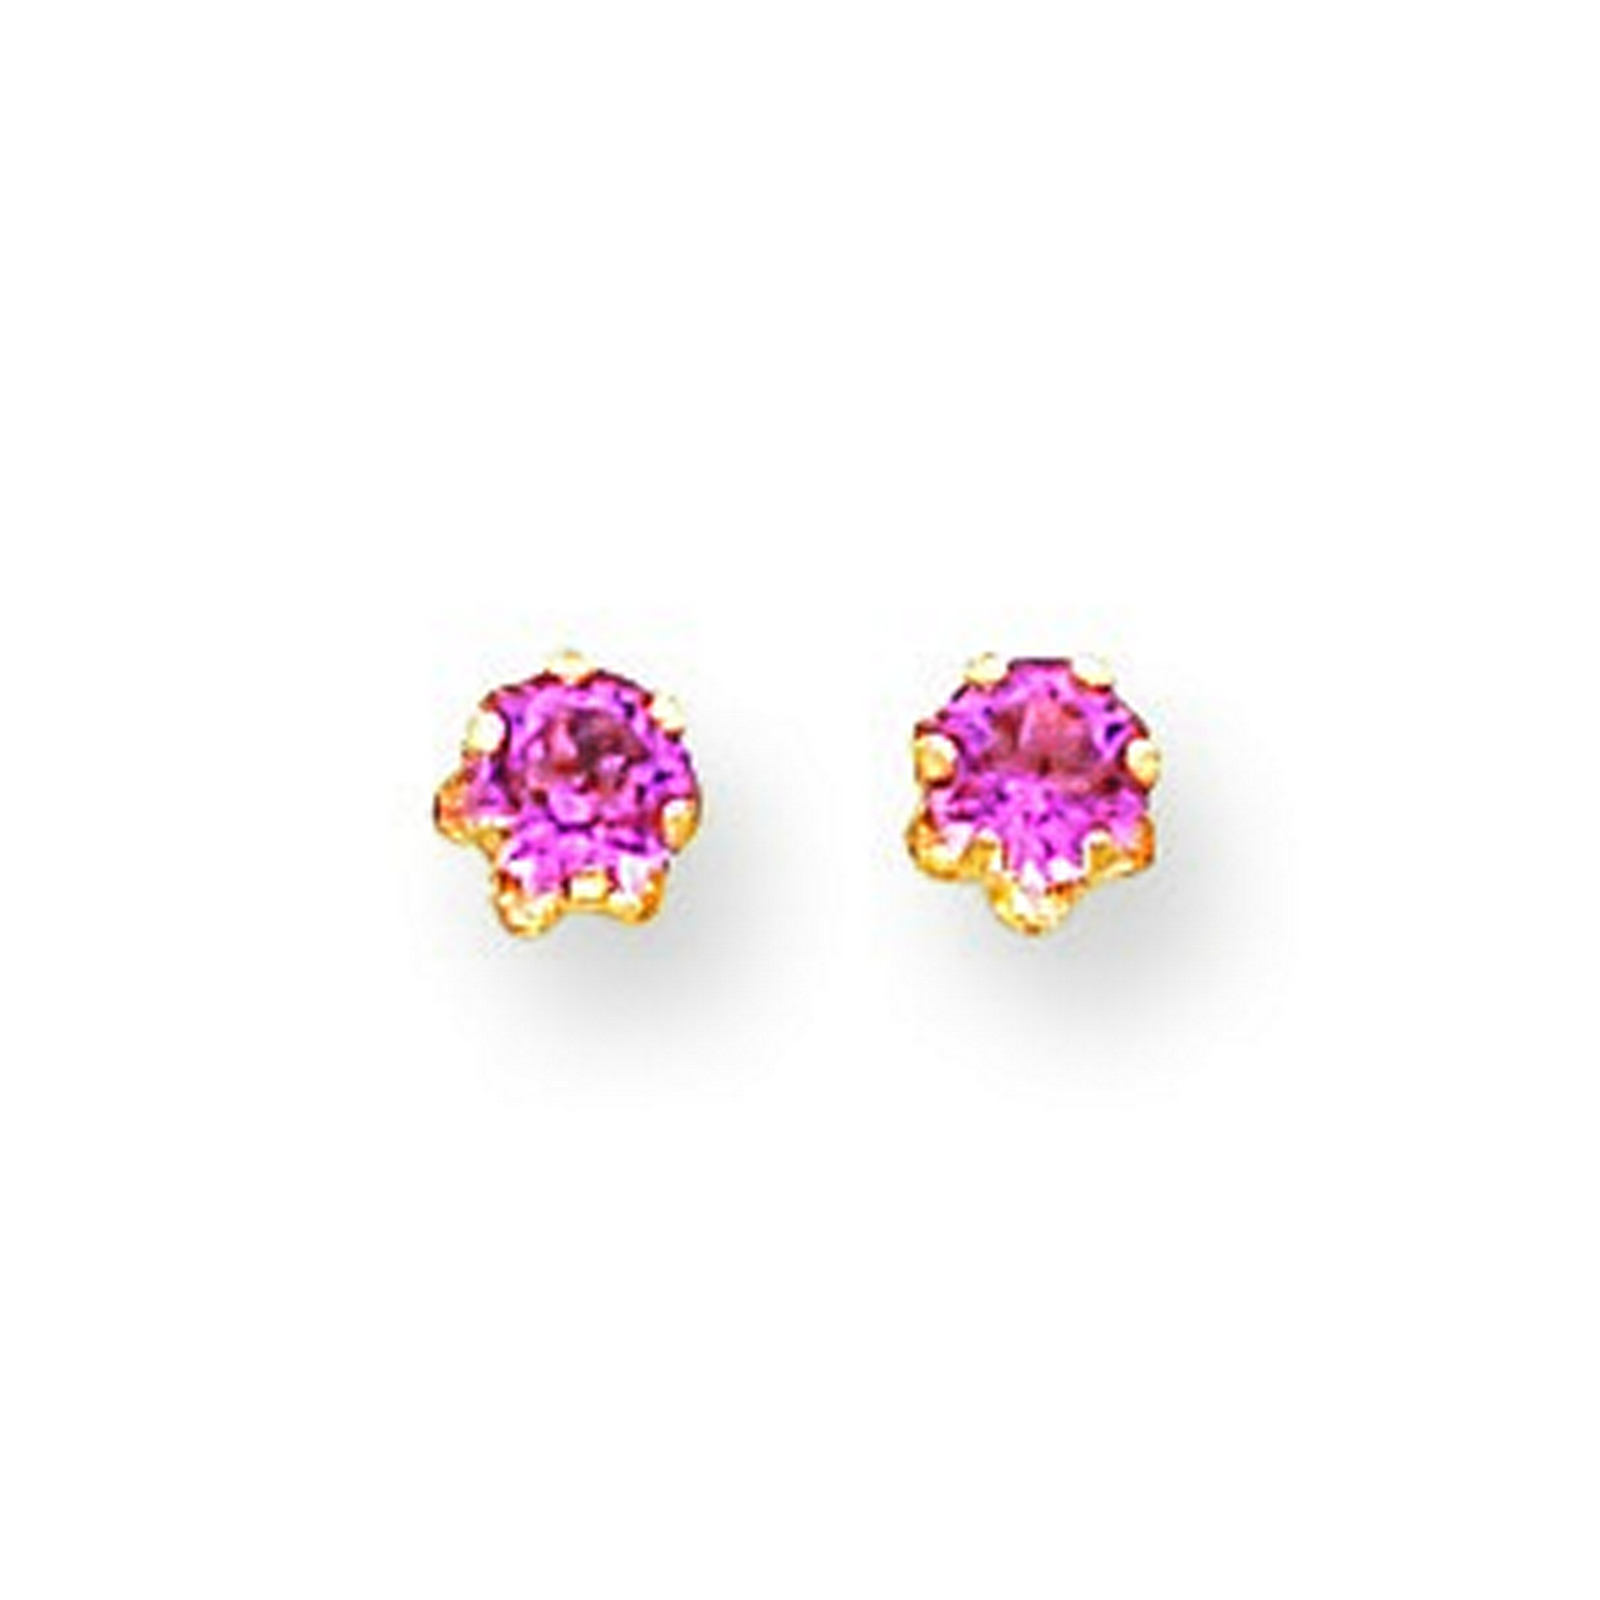 14k Yellow Gold 4mm Synthetic Pink Tourmaline (Oct) Screwback Earrings - Measures 4x4mm